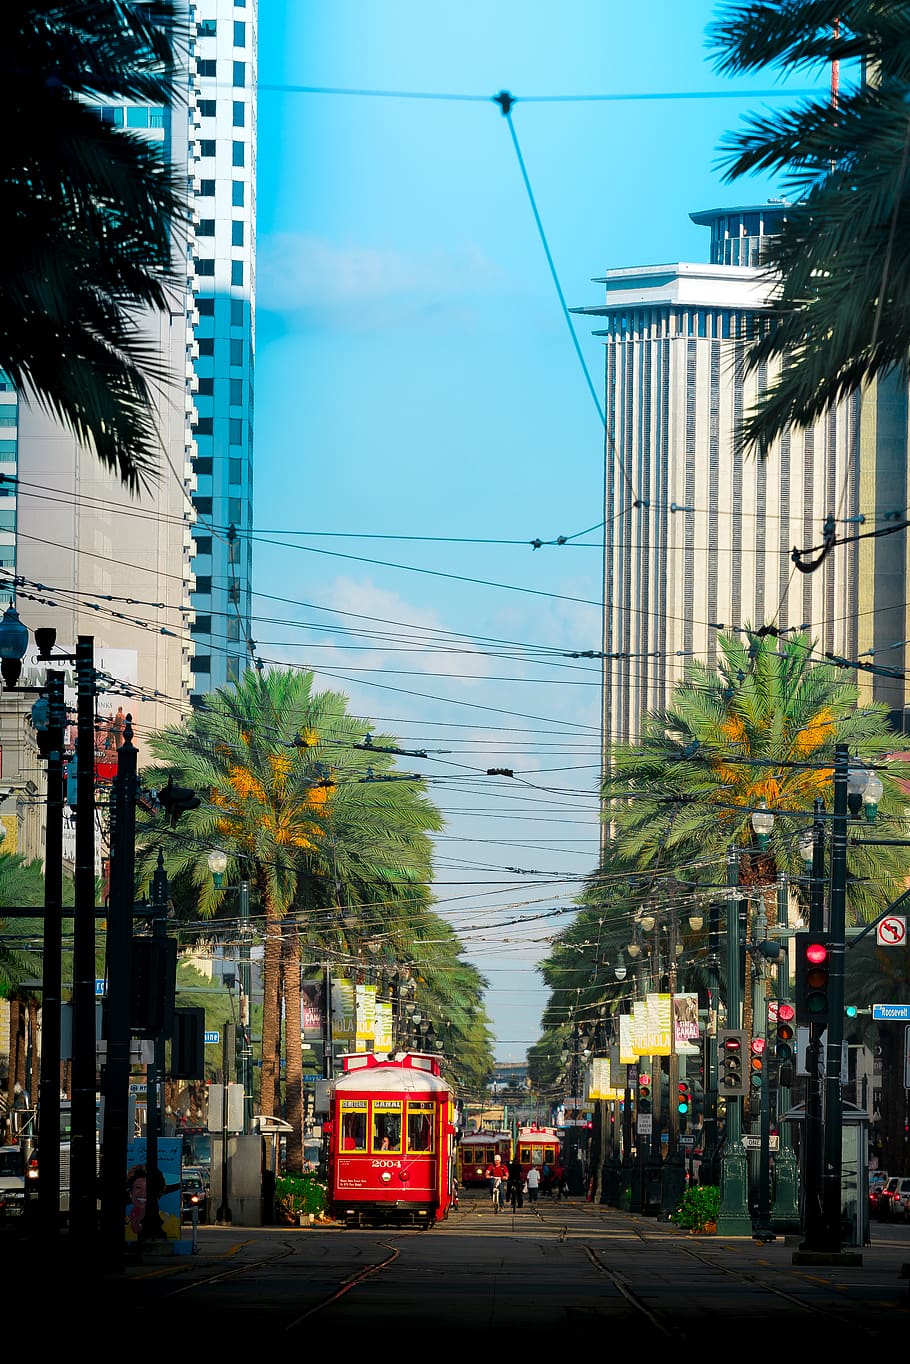 new orleans, united states, palmtrees, urban, city, canal st